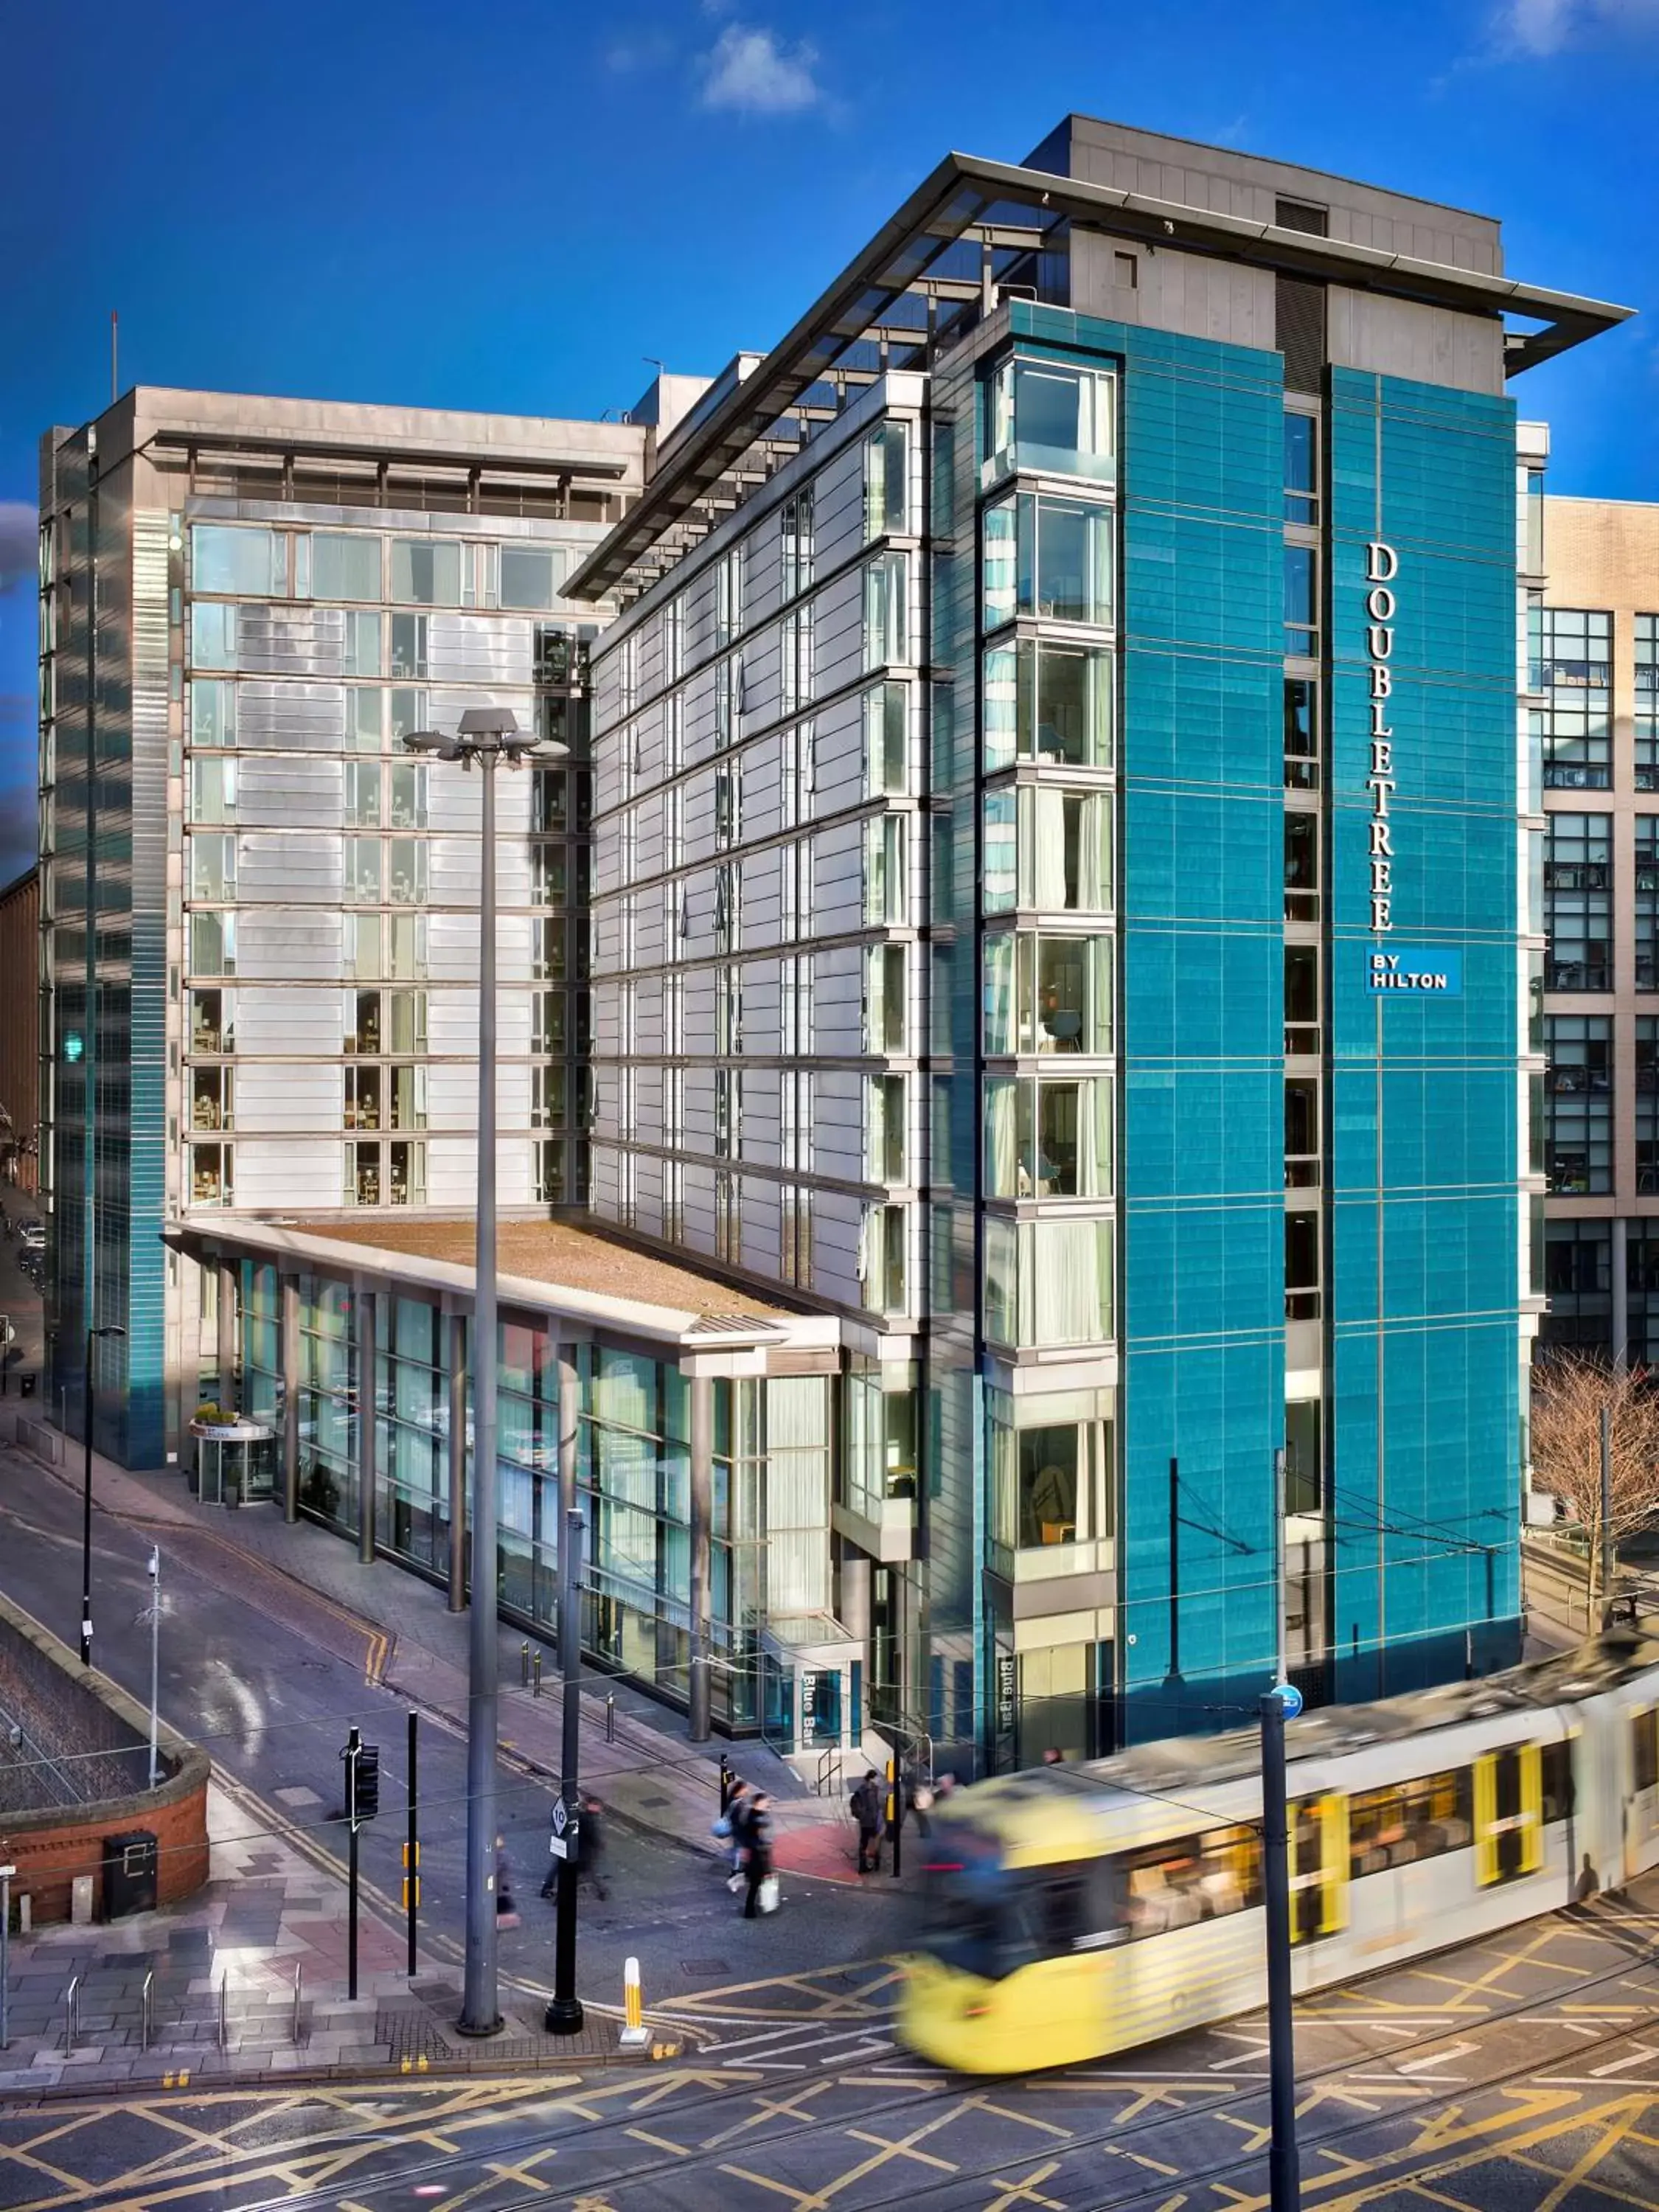 Property Building in DoubleTree by Hilton Manchester Piccadilly